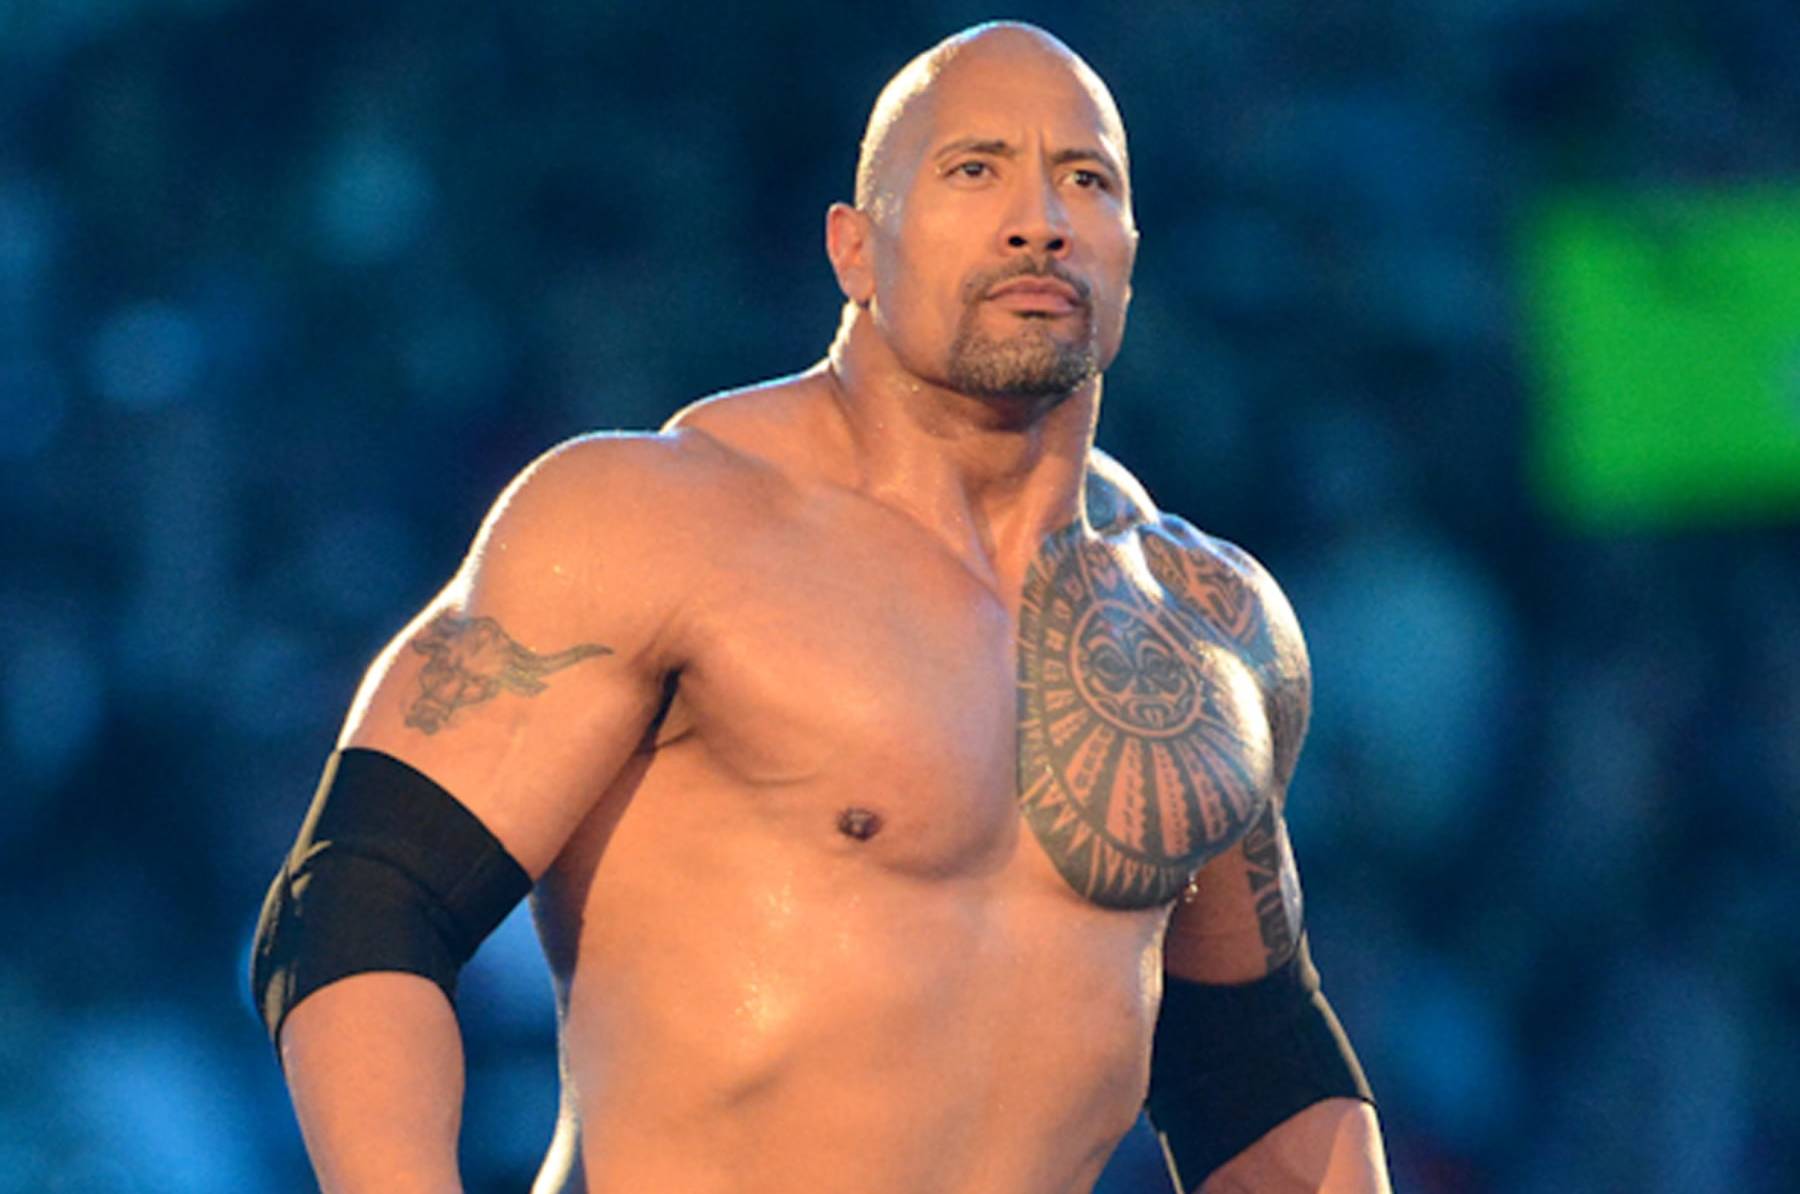 The Rock's biggest SmackDown moments: WWE Playlist 